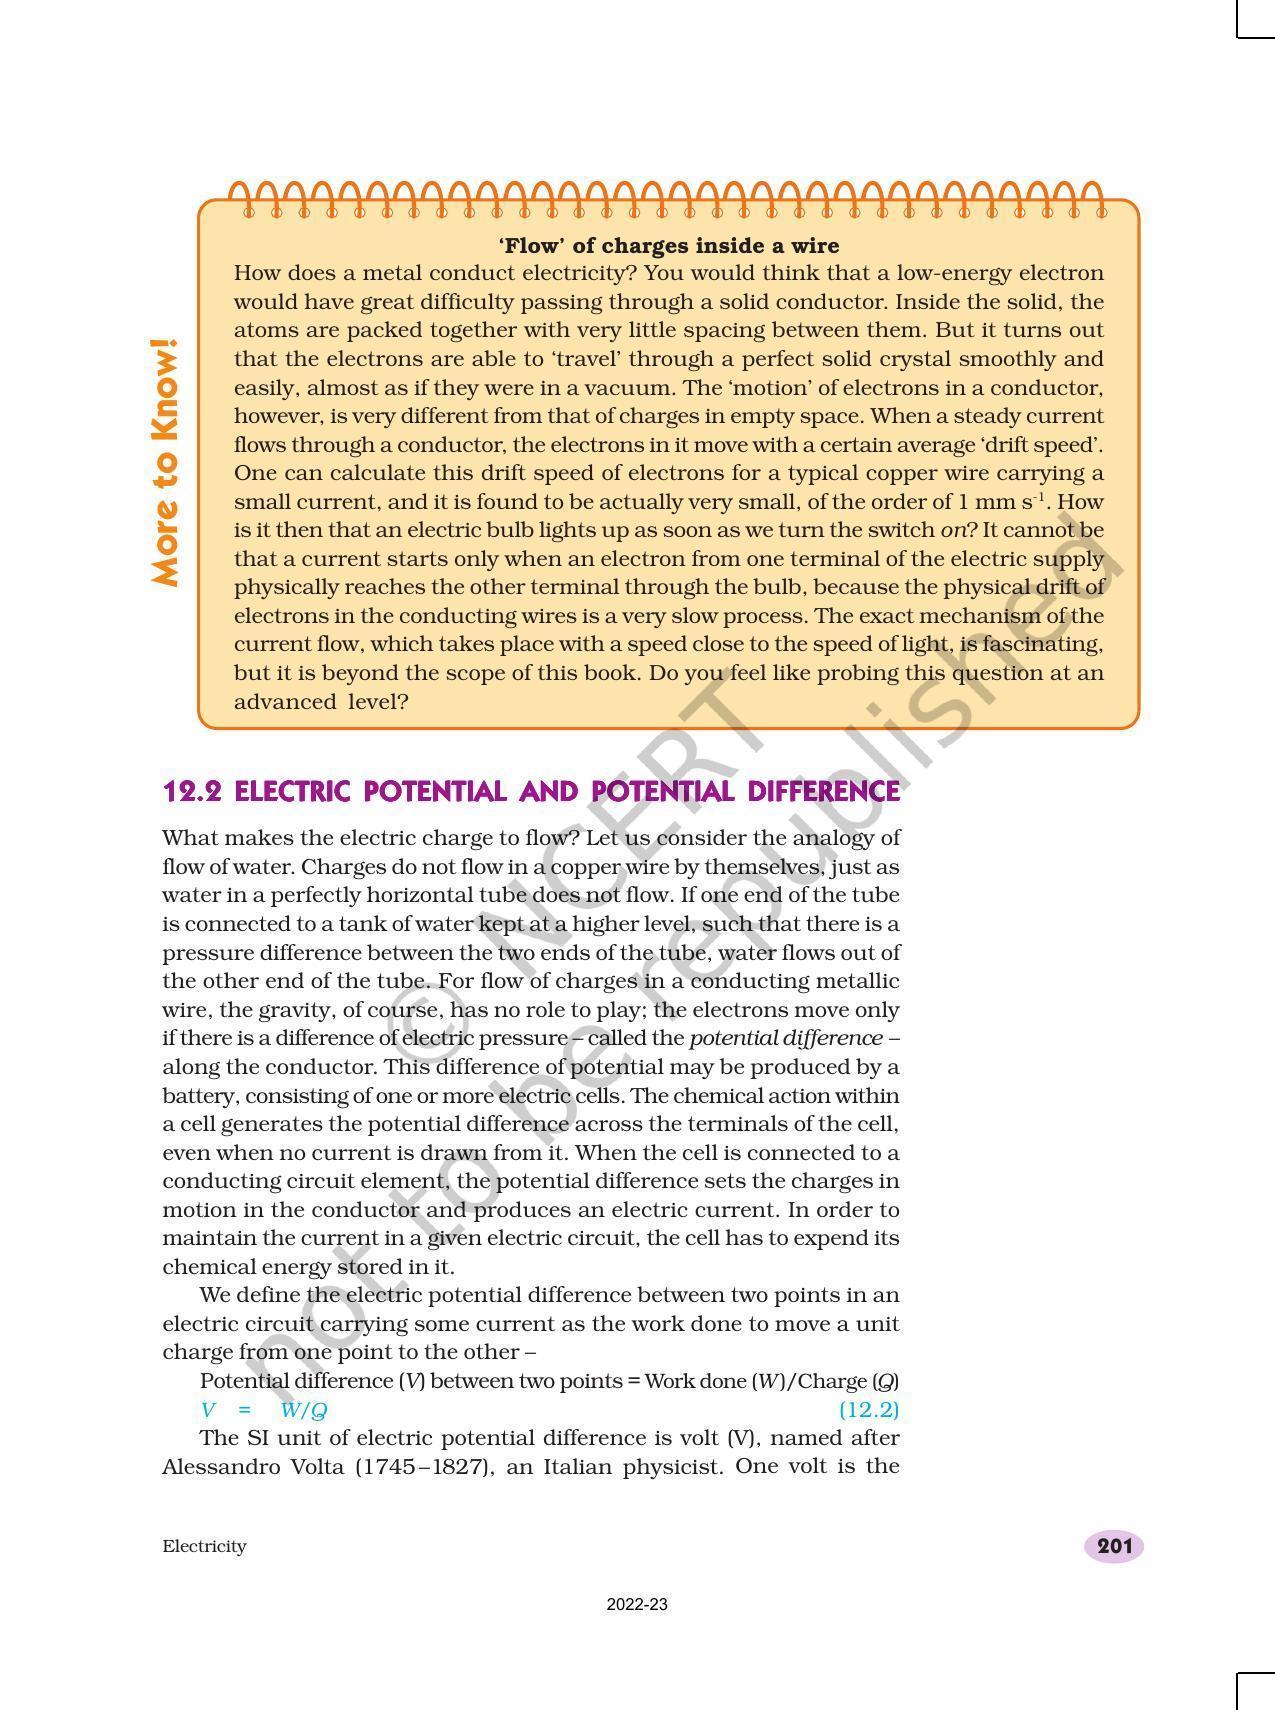 NCERT Book for Class 10 Science Chapter 12 Electricity - Page 3